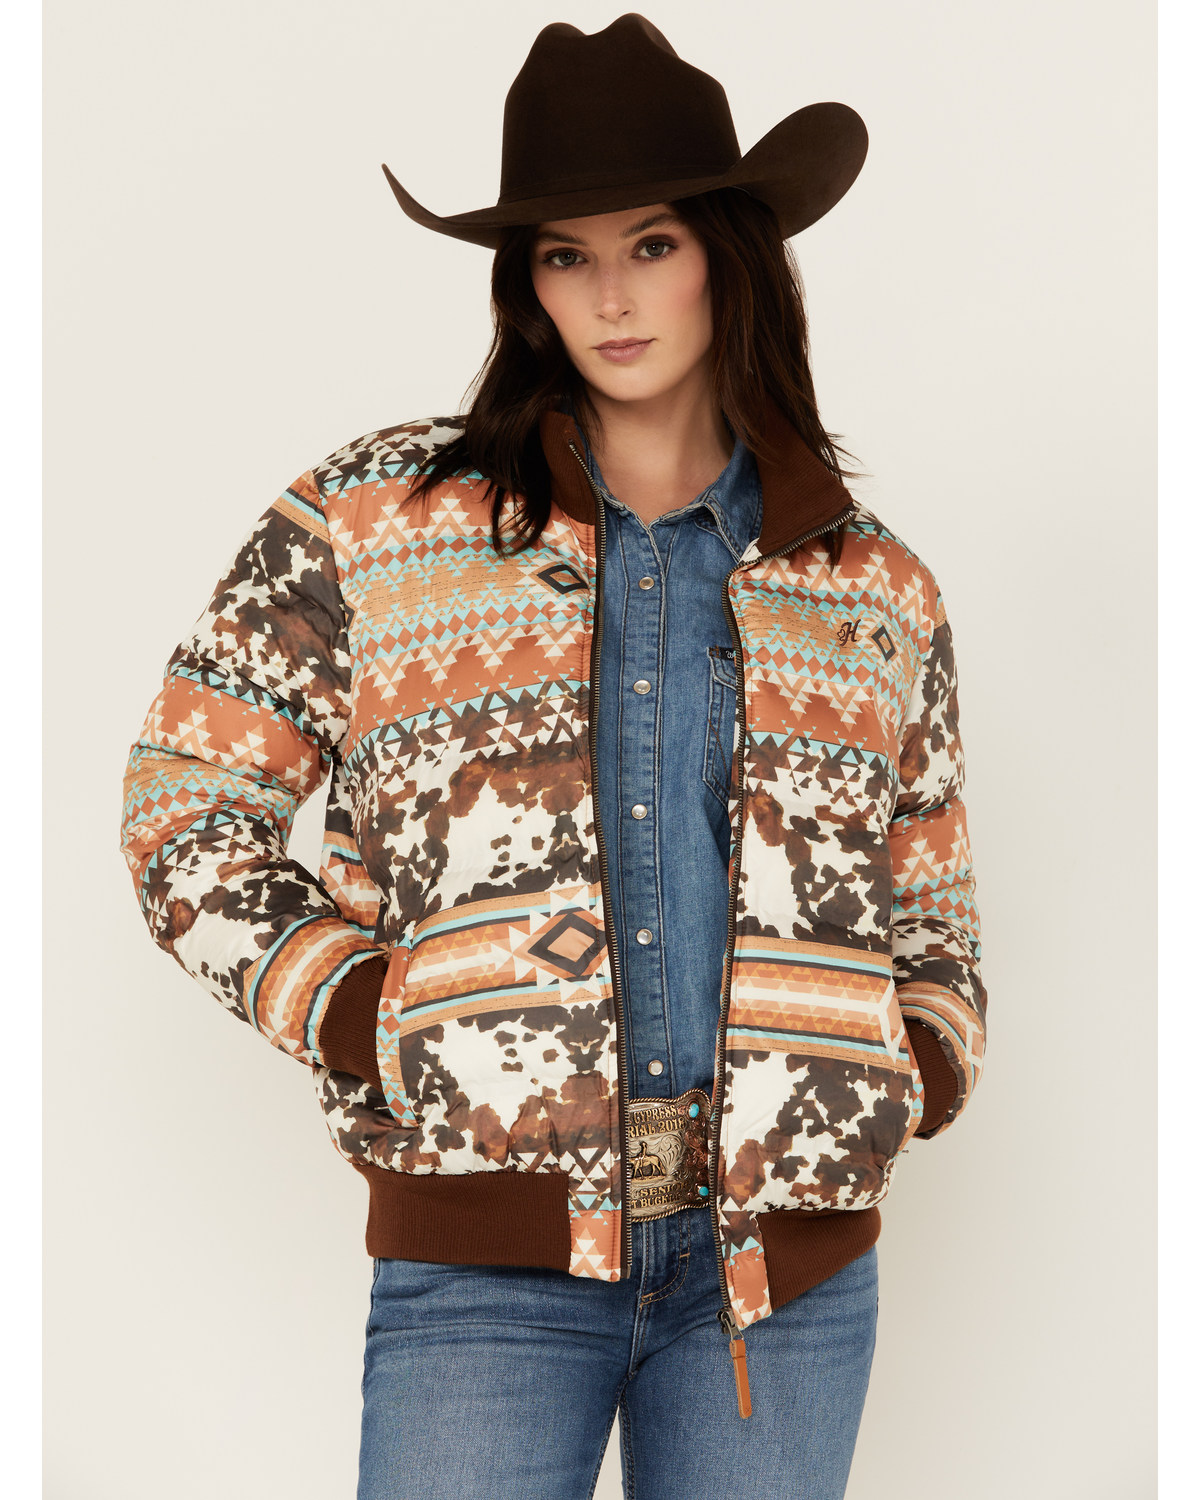 Hooey Women's Southwestern Print Quilted Track Jacket